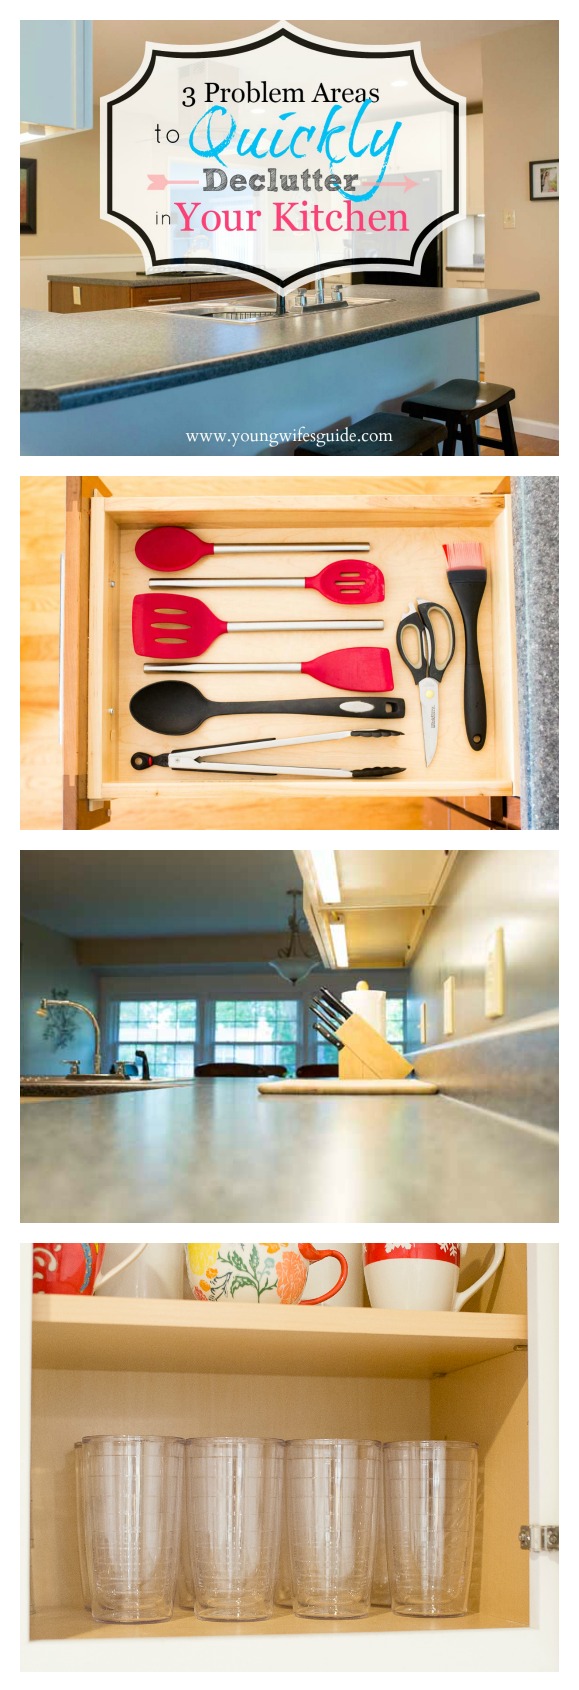 3 problem areas to quickly declutter in your kitchen 2